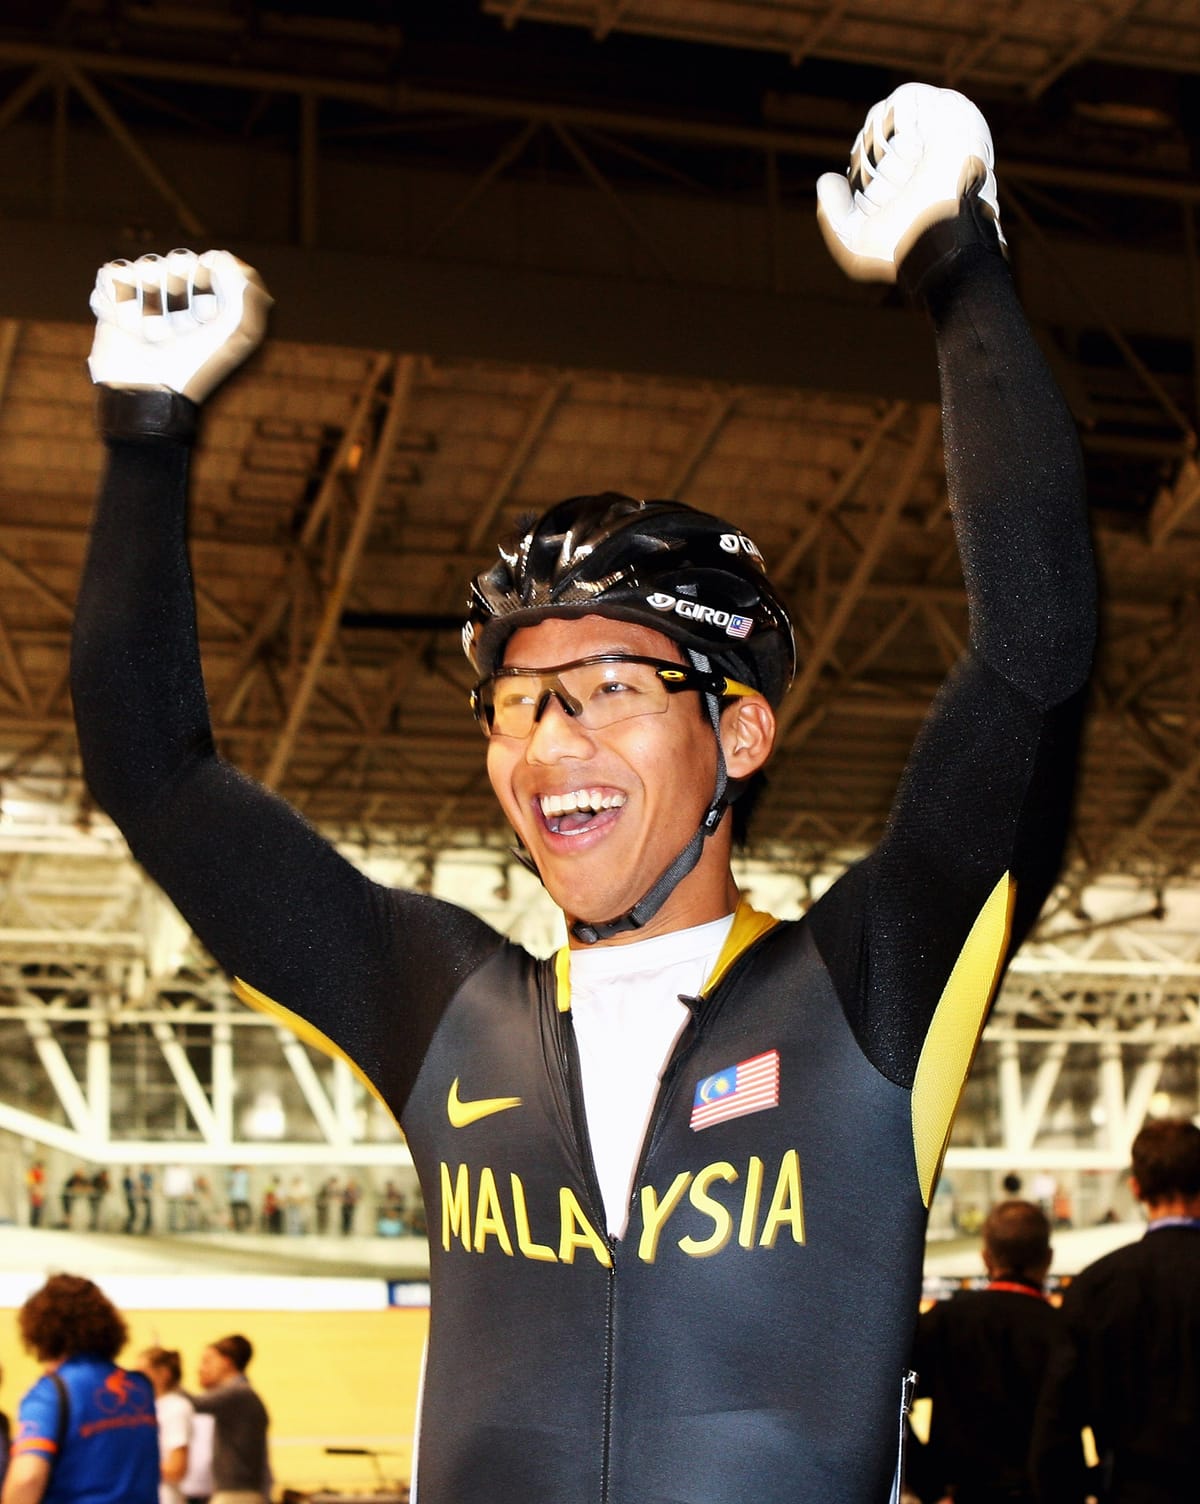 journey-with-an-olympian-cycling-and-brunch-at-mayor-hills-josiah-ng-malaysia-pelago0.jpg